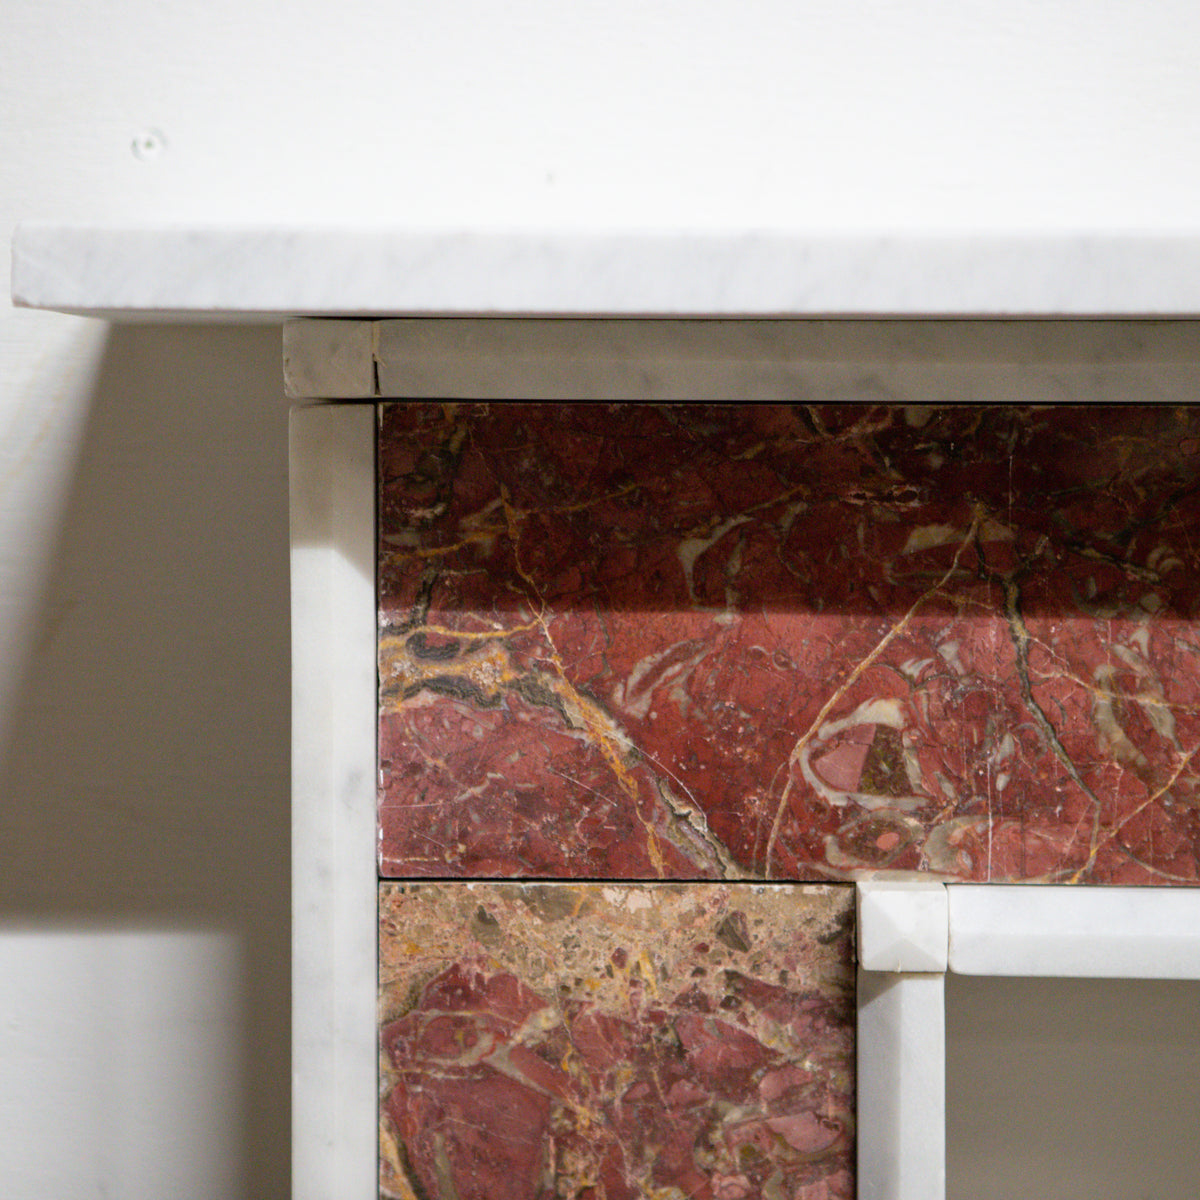 Regency Style Carrara &amp; Rouge Marble Fireplace Surround | The Architectural Forum